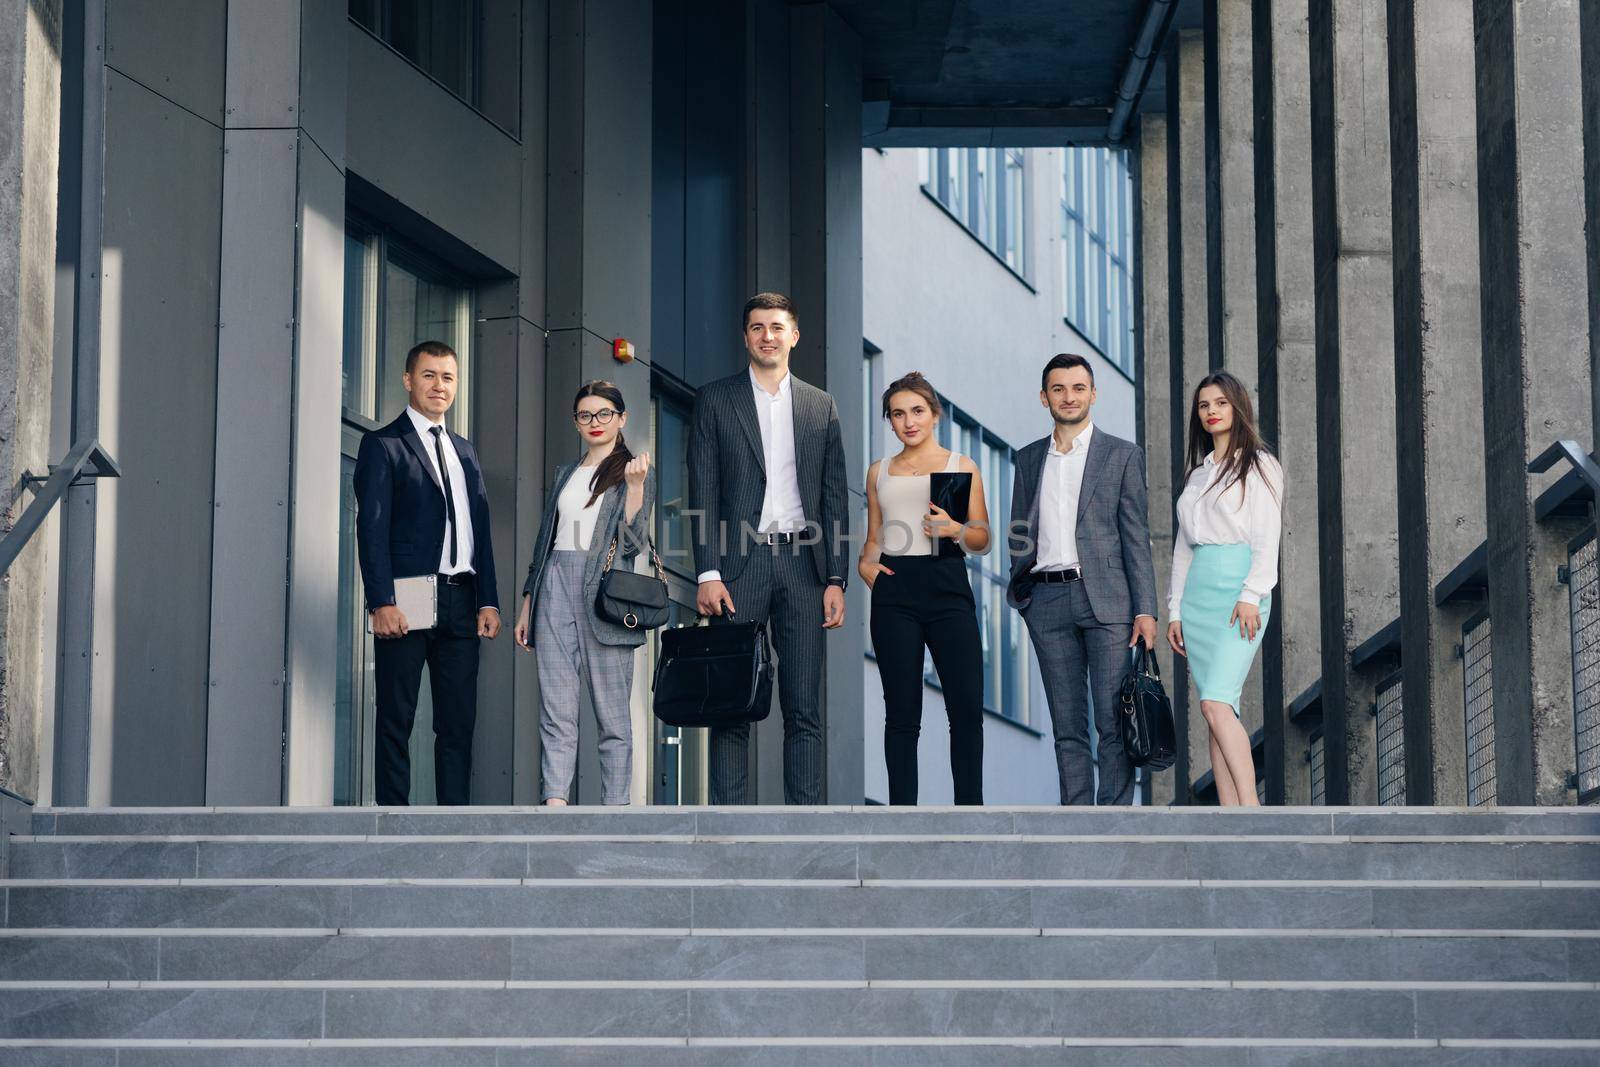 Happy proud professional diverse business people group look at camera. Corporate team portrait. Smiling team of diverse different generations business people looking at camera.